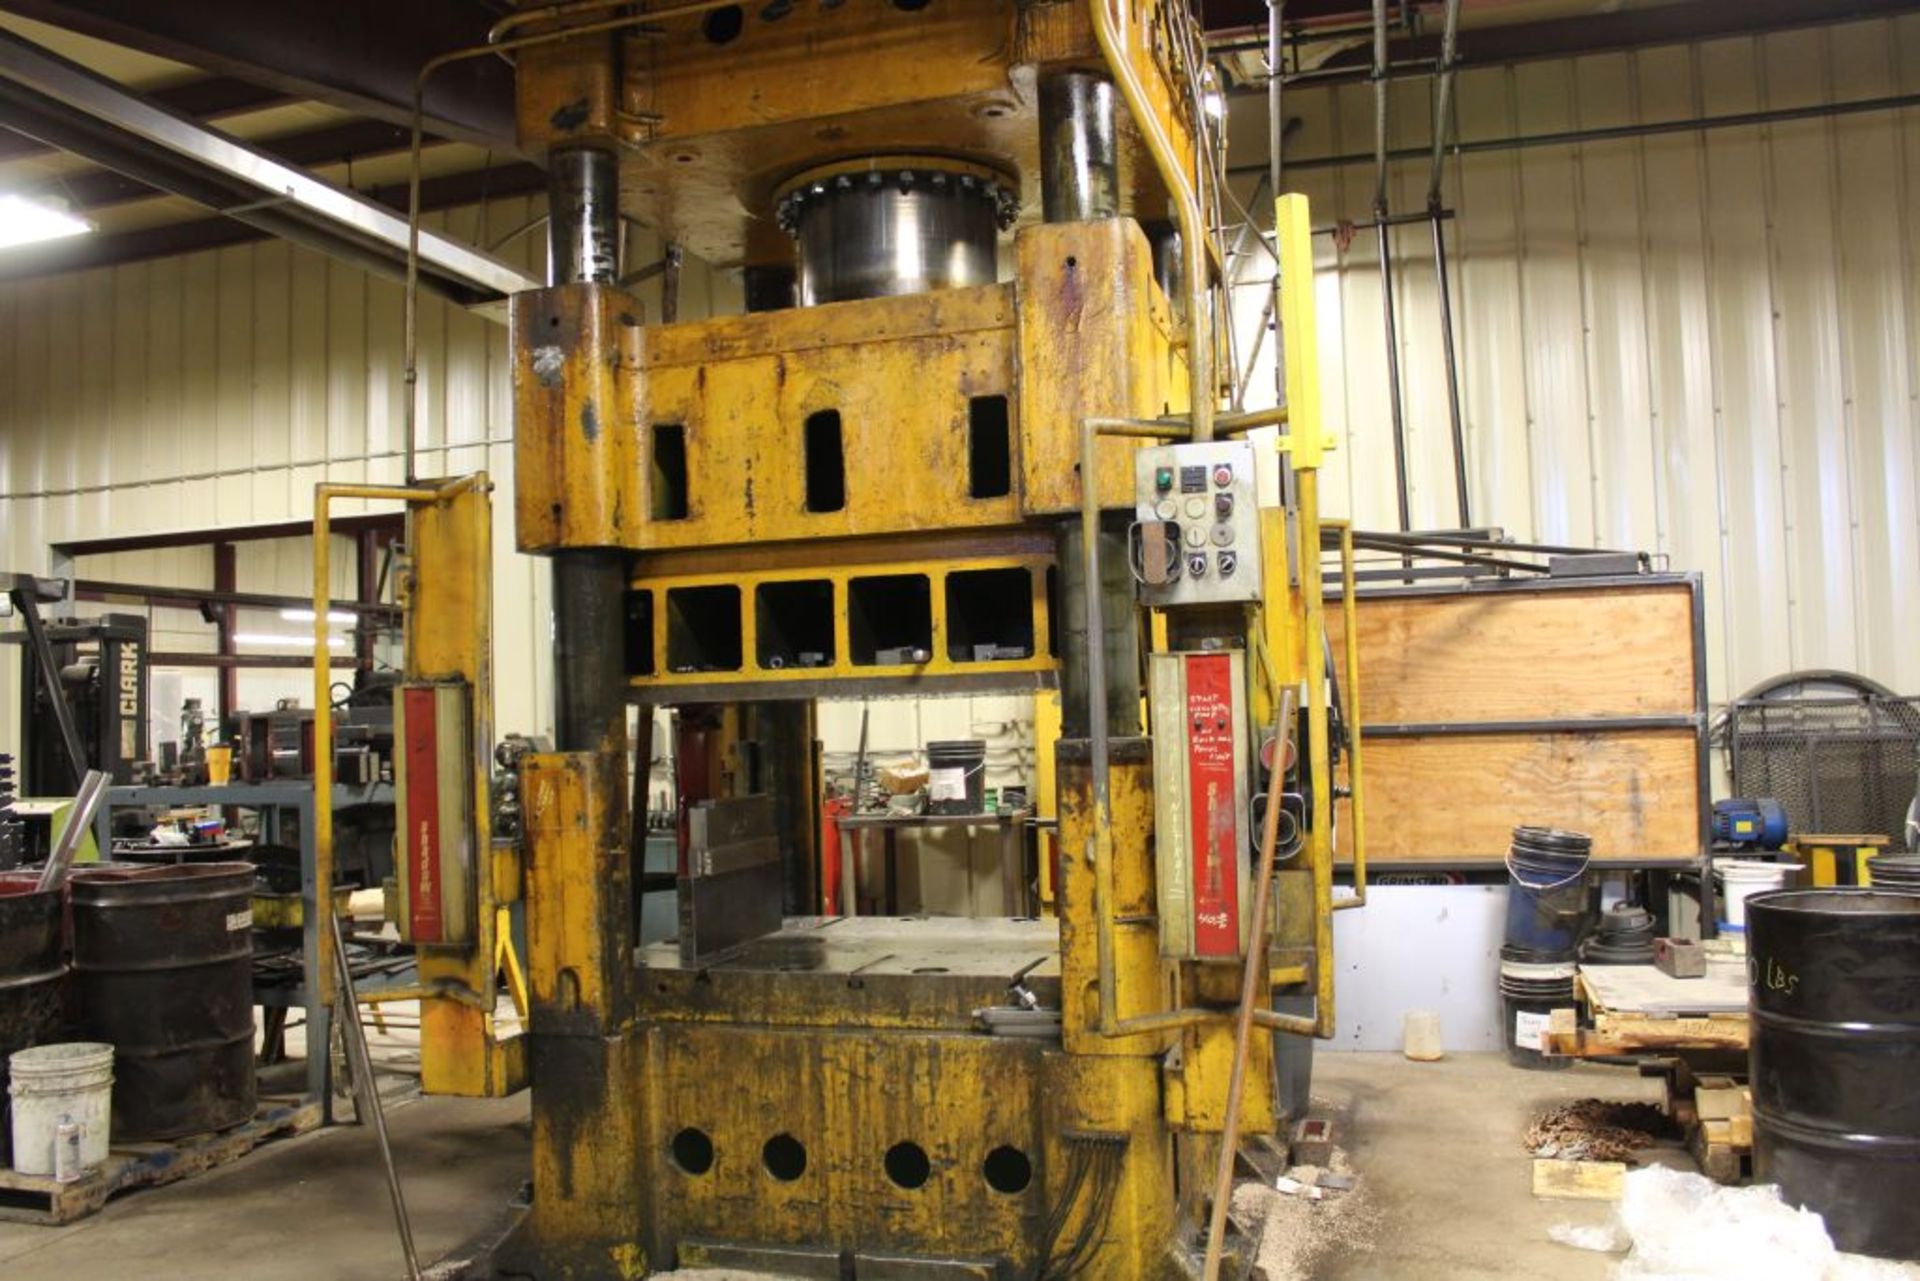 Elms hydraulic press, 600 T., 75 hp, 44 x 66" bed, 6' pit, safety curtain.